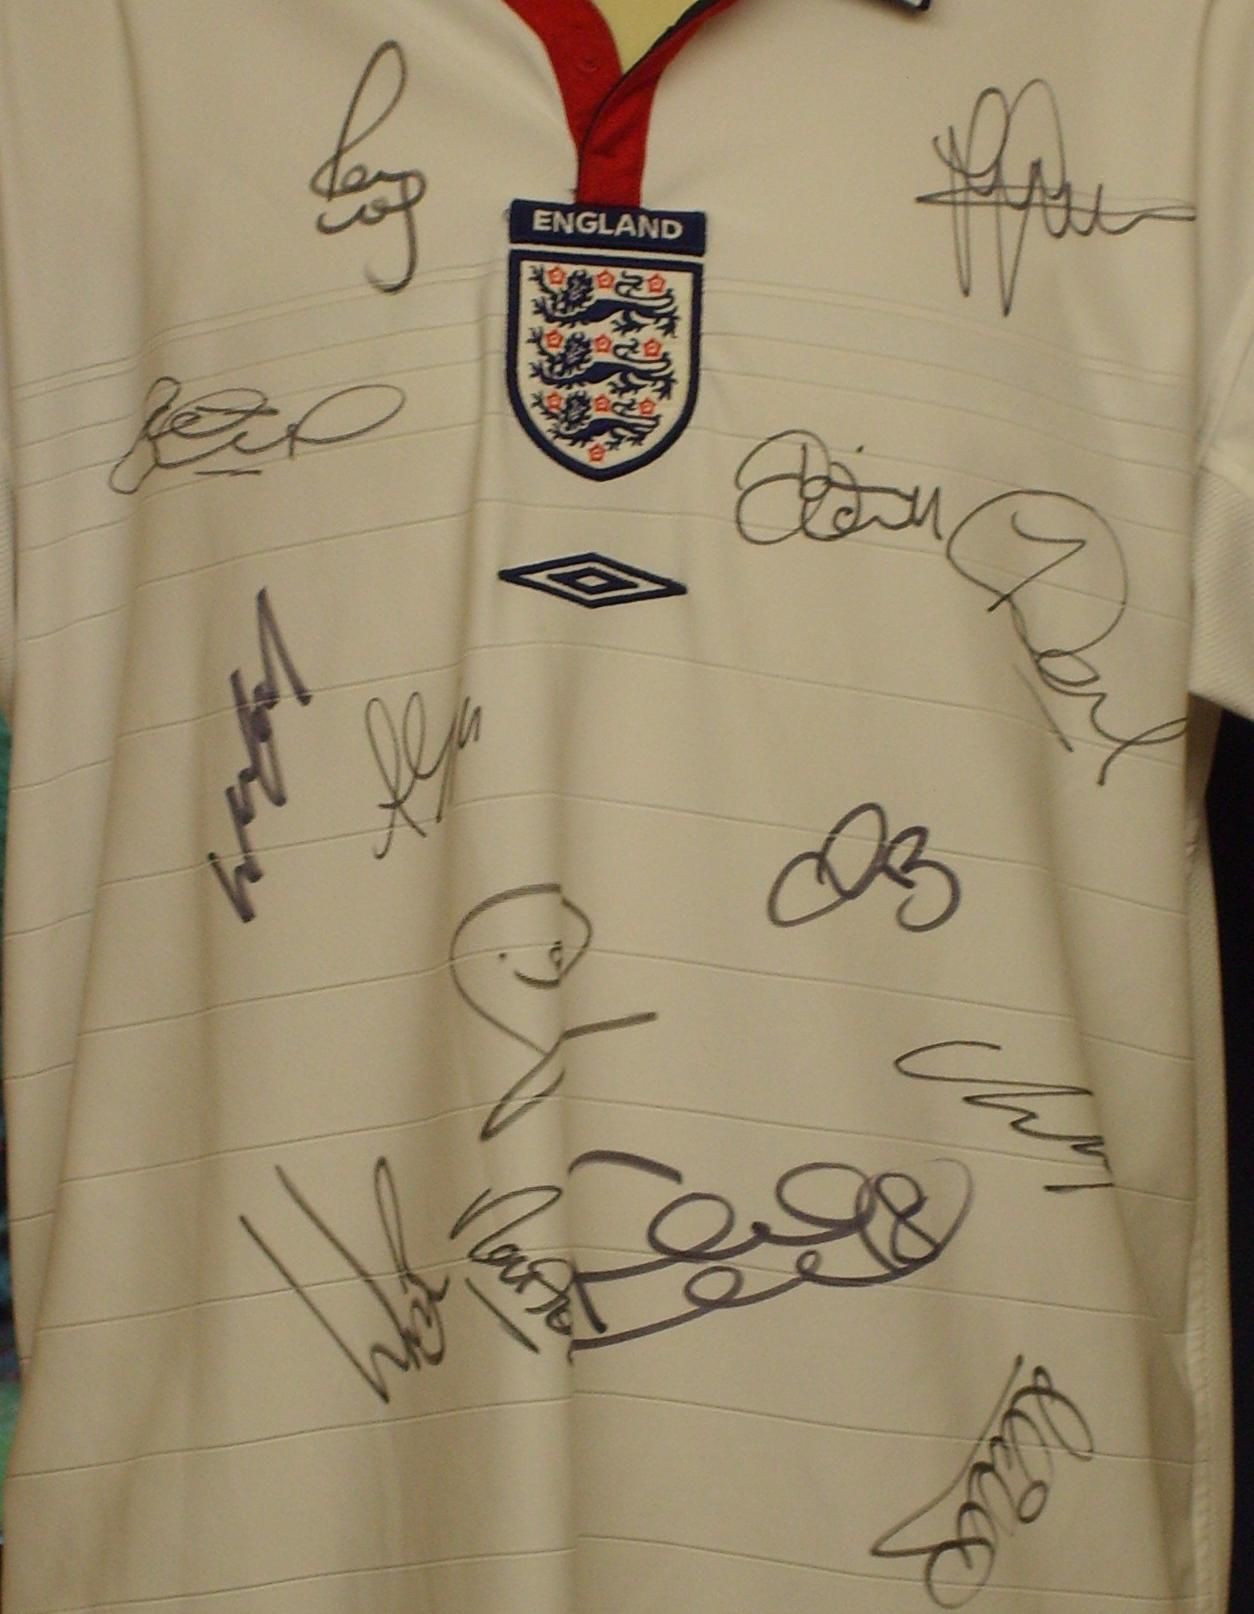 England shirt signed by various players